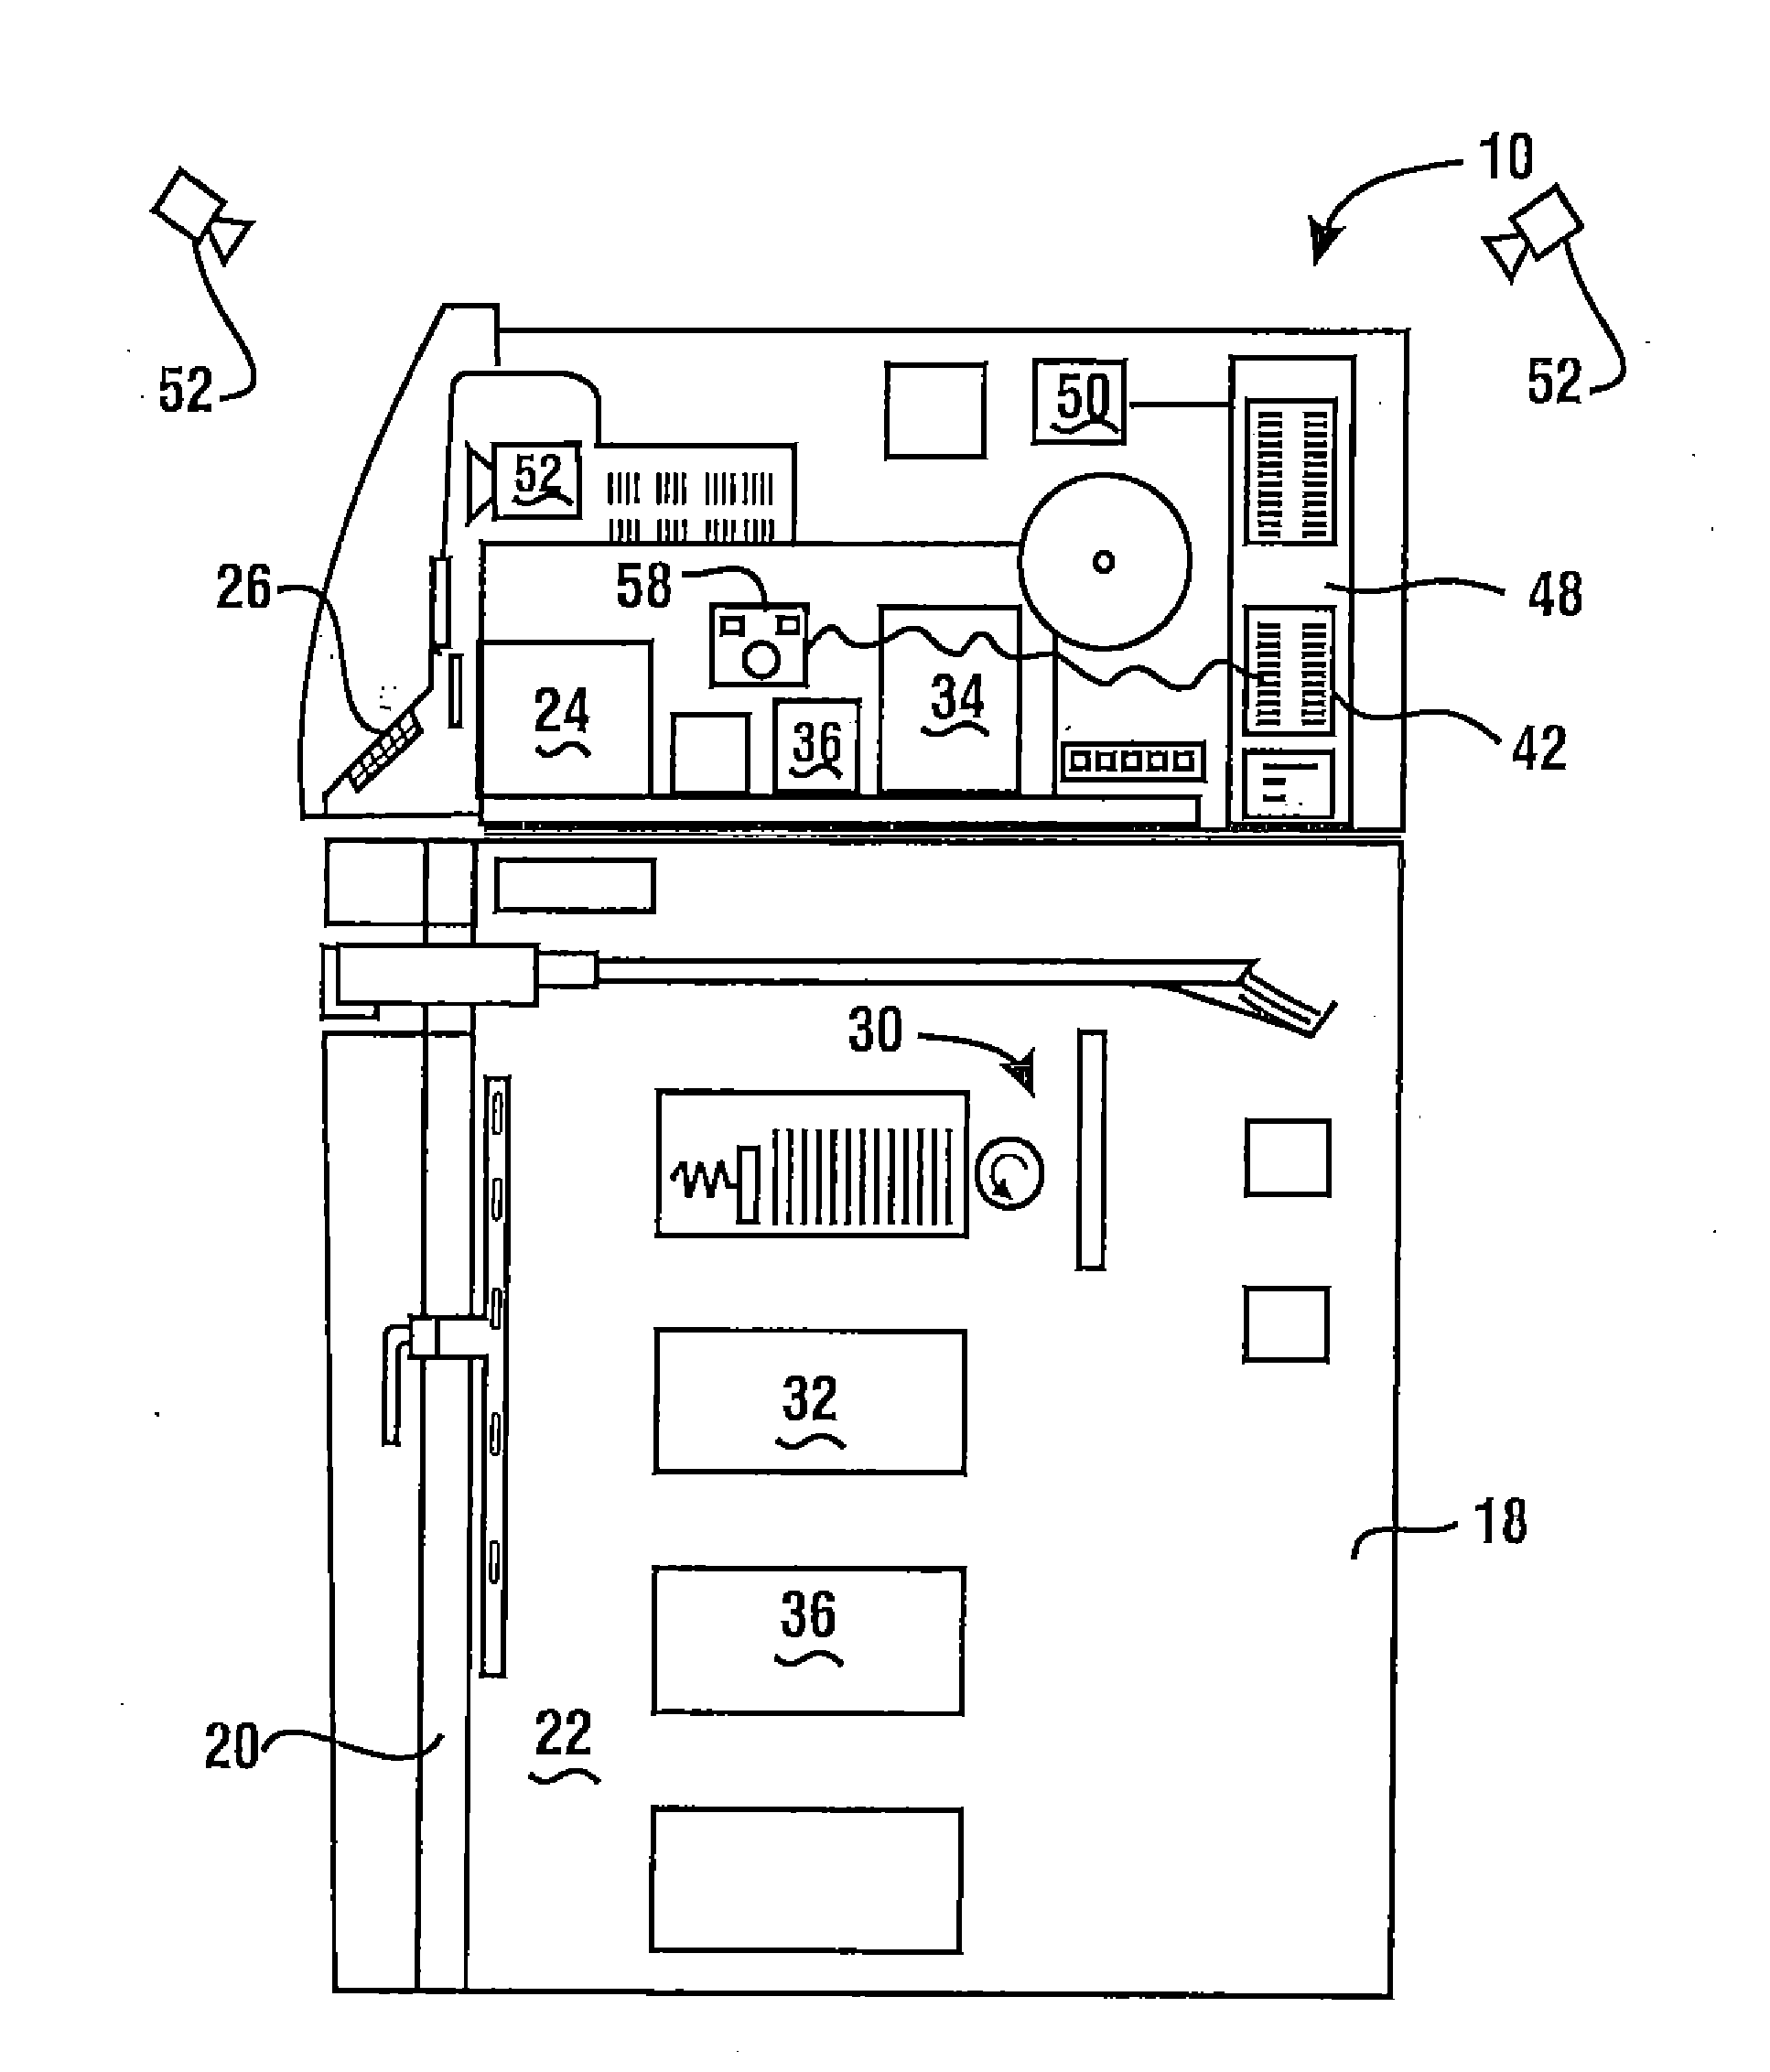 Automated Banking System Controlled Responsive to Data Bearing Records